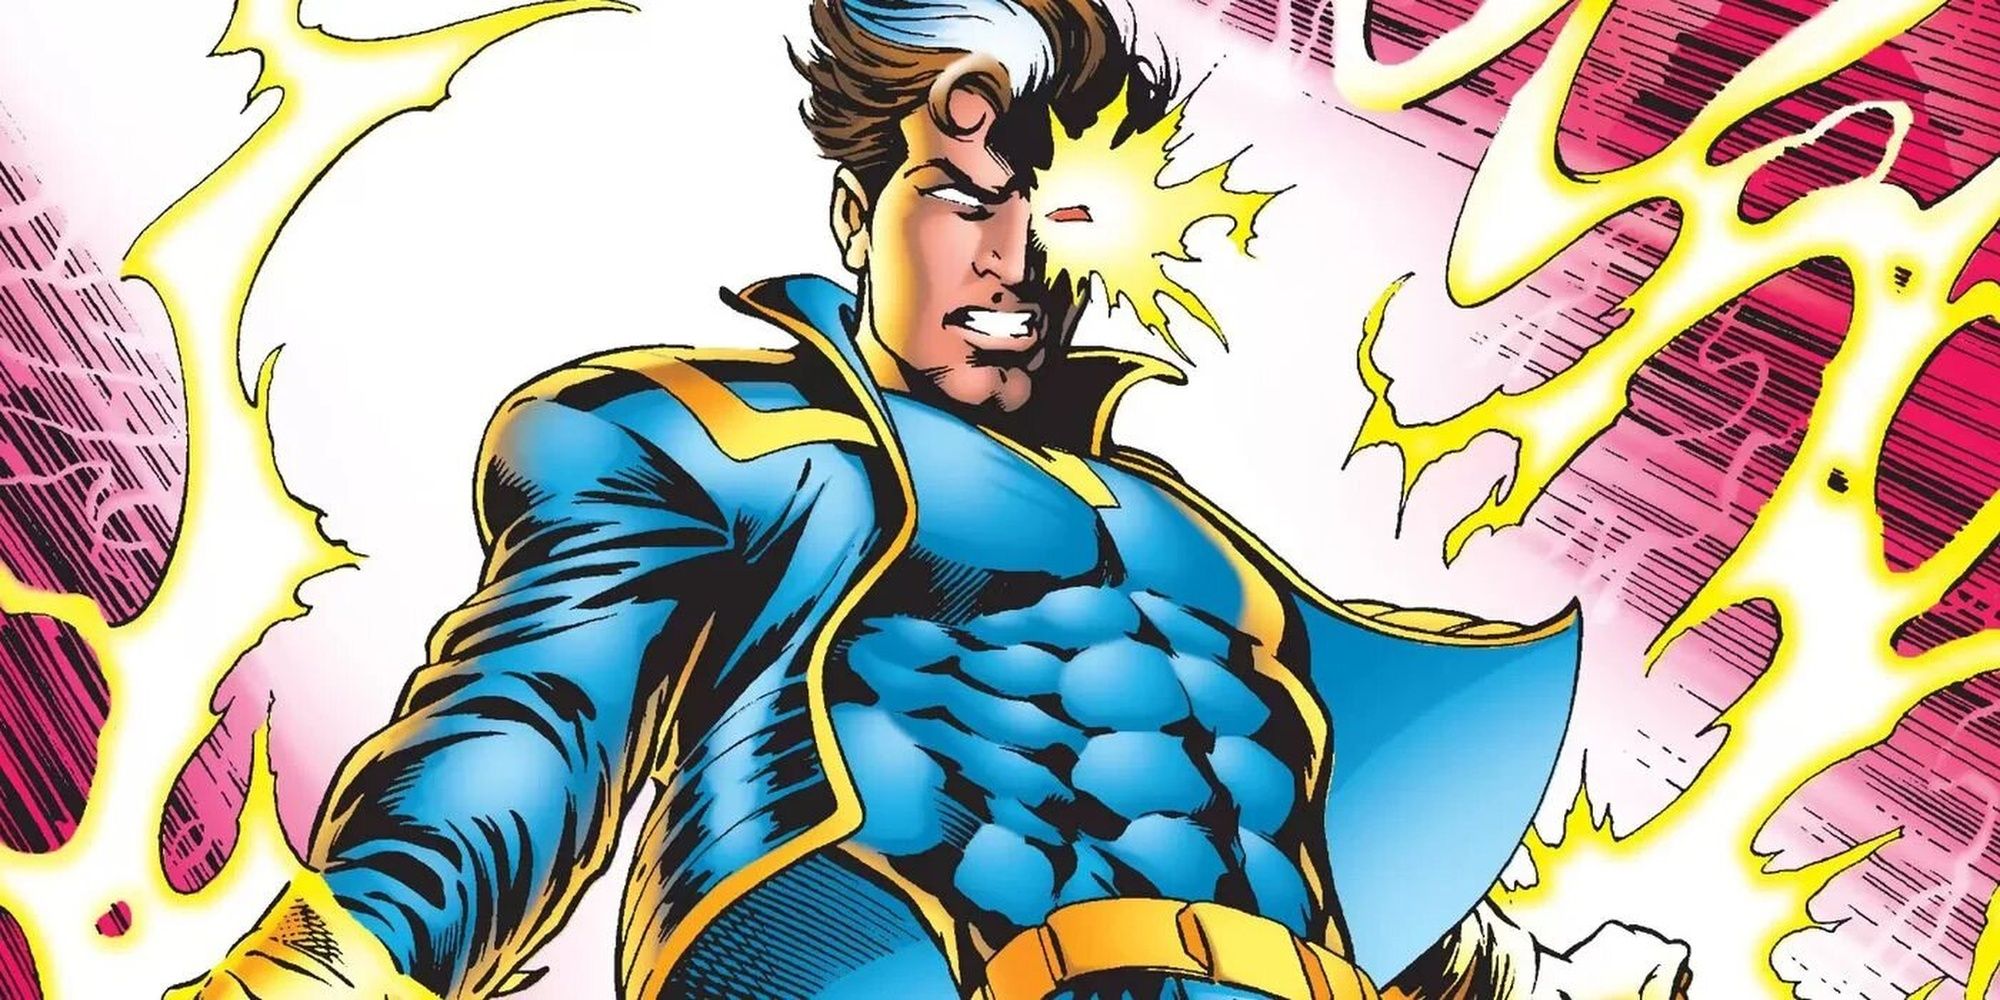 X-Man, Nate Grey, is harnessing his powers, being surrounded by bands of psionic energy and emitting energy from his eye. 